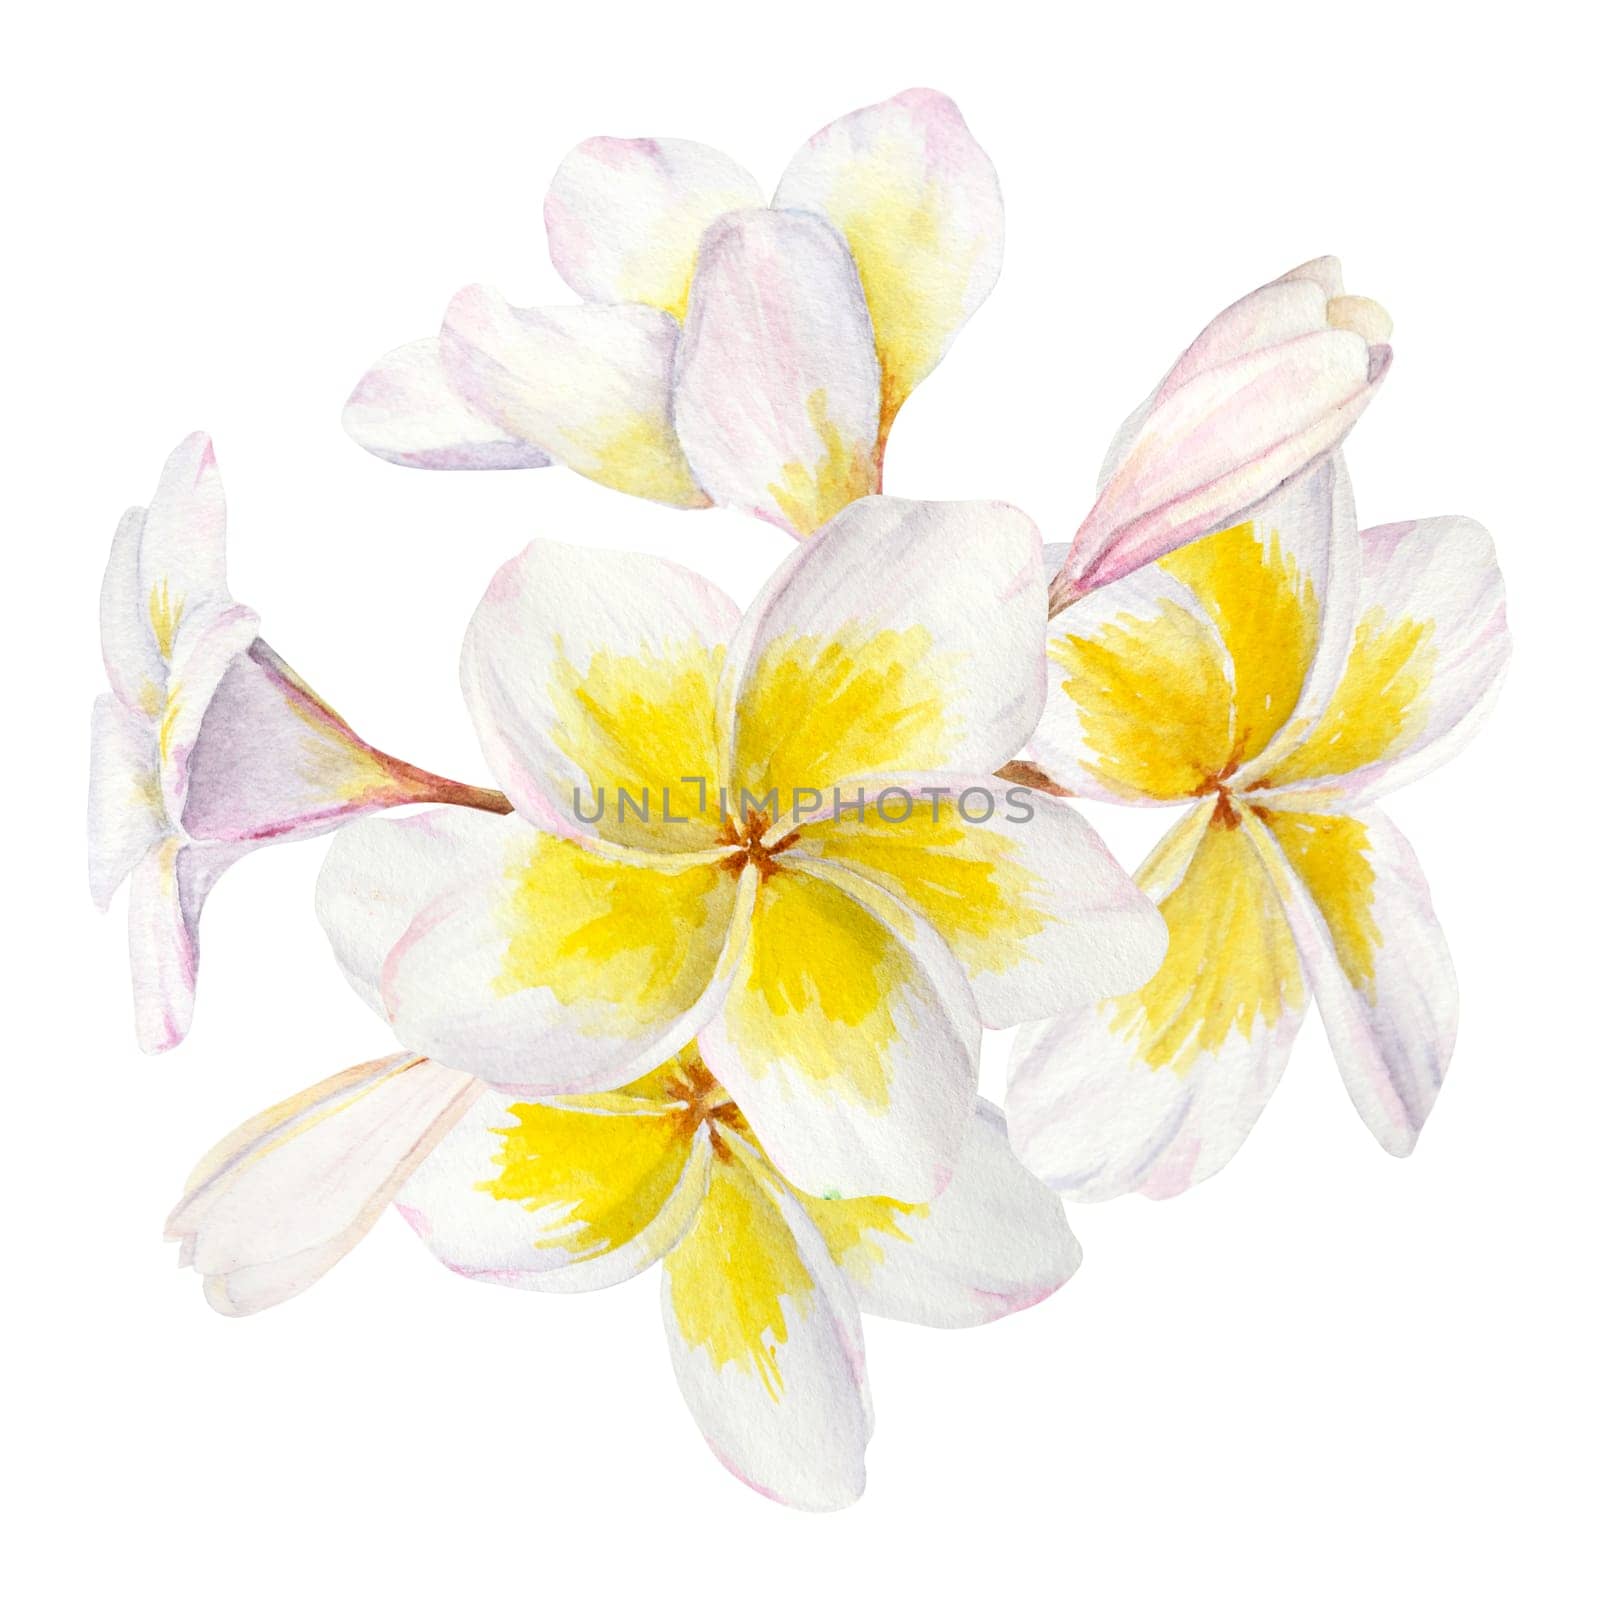 White frangipani illustration. Watercolor hand drawn clip art of exotic flower plumeria. Tropical painting for wedding invitations, spa and massage salon prints, cosmetic packing, travel guides by florainlove_art